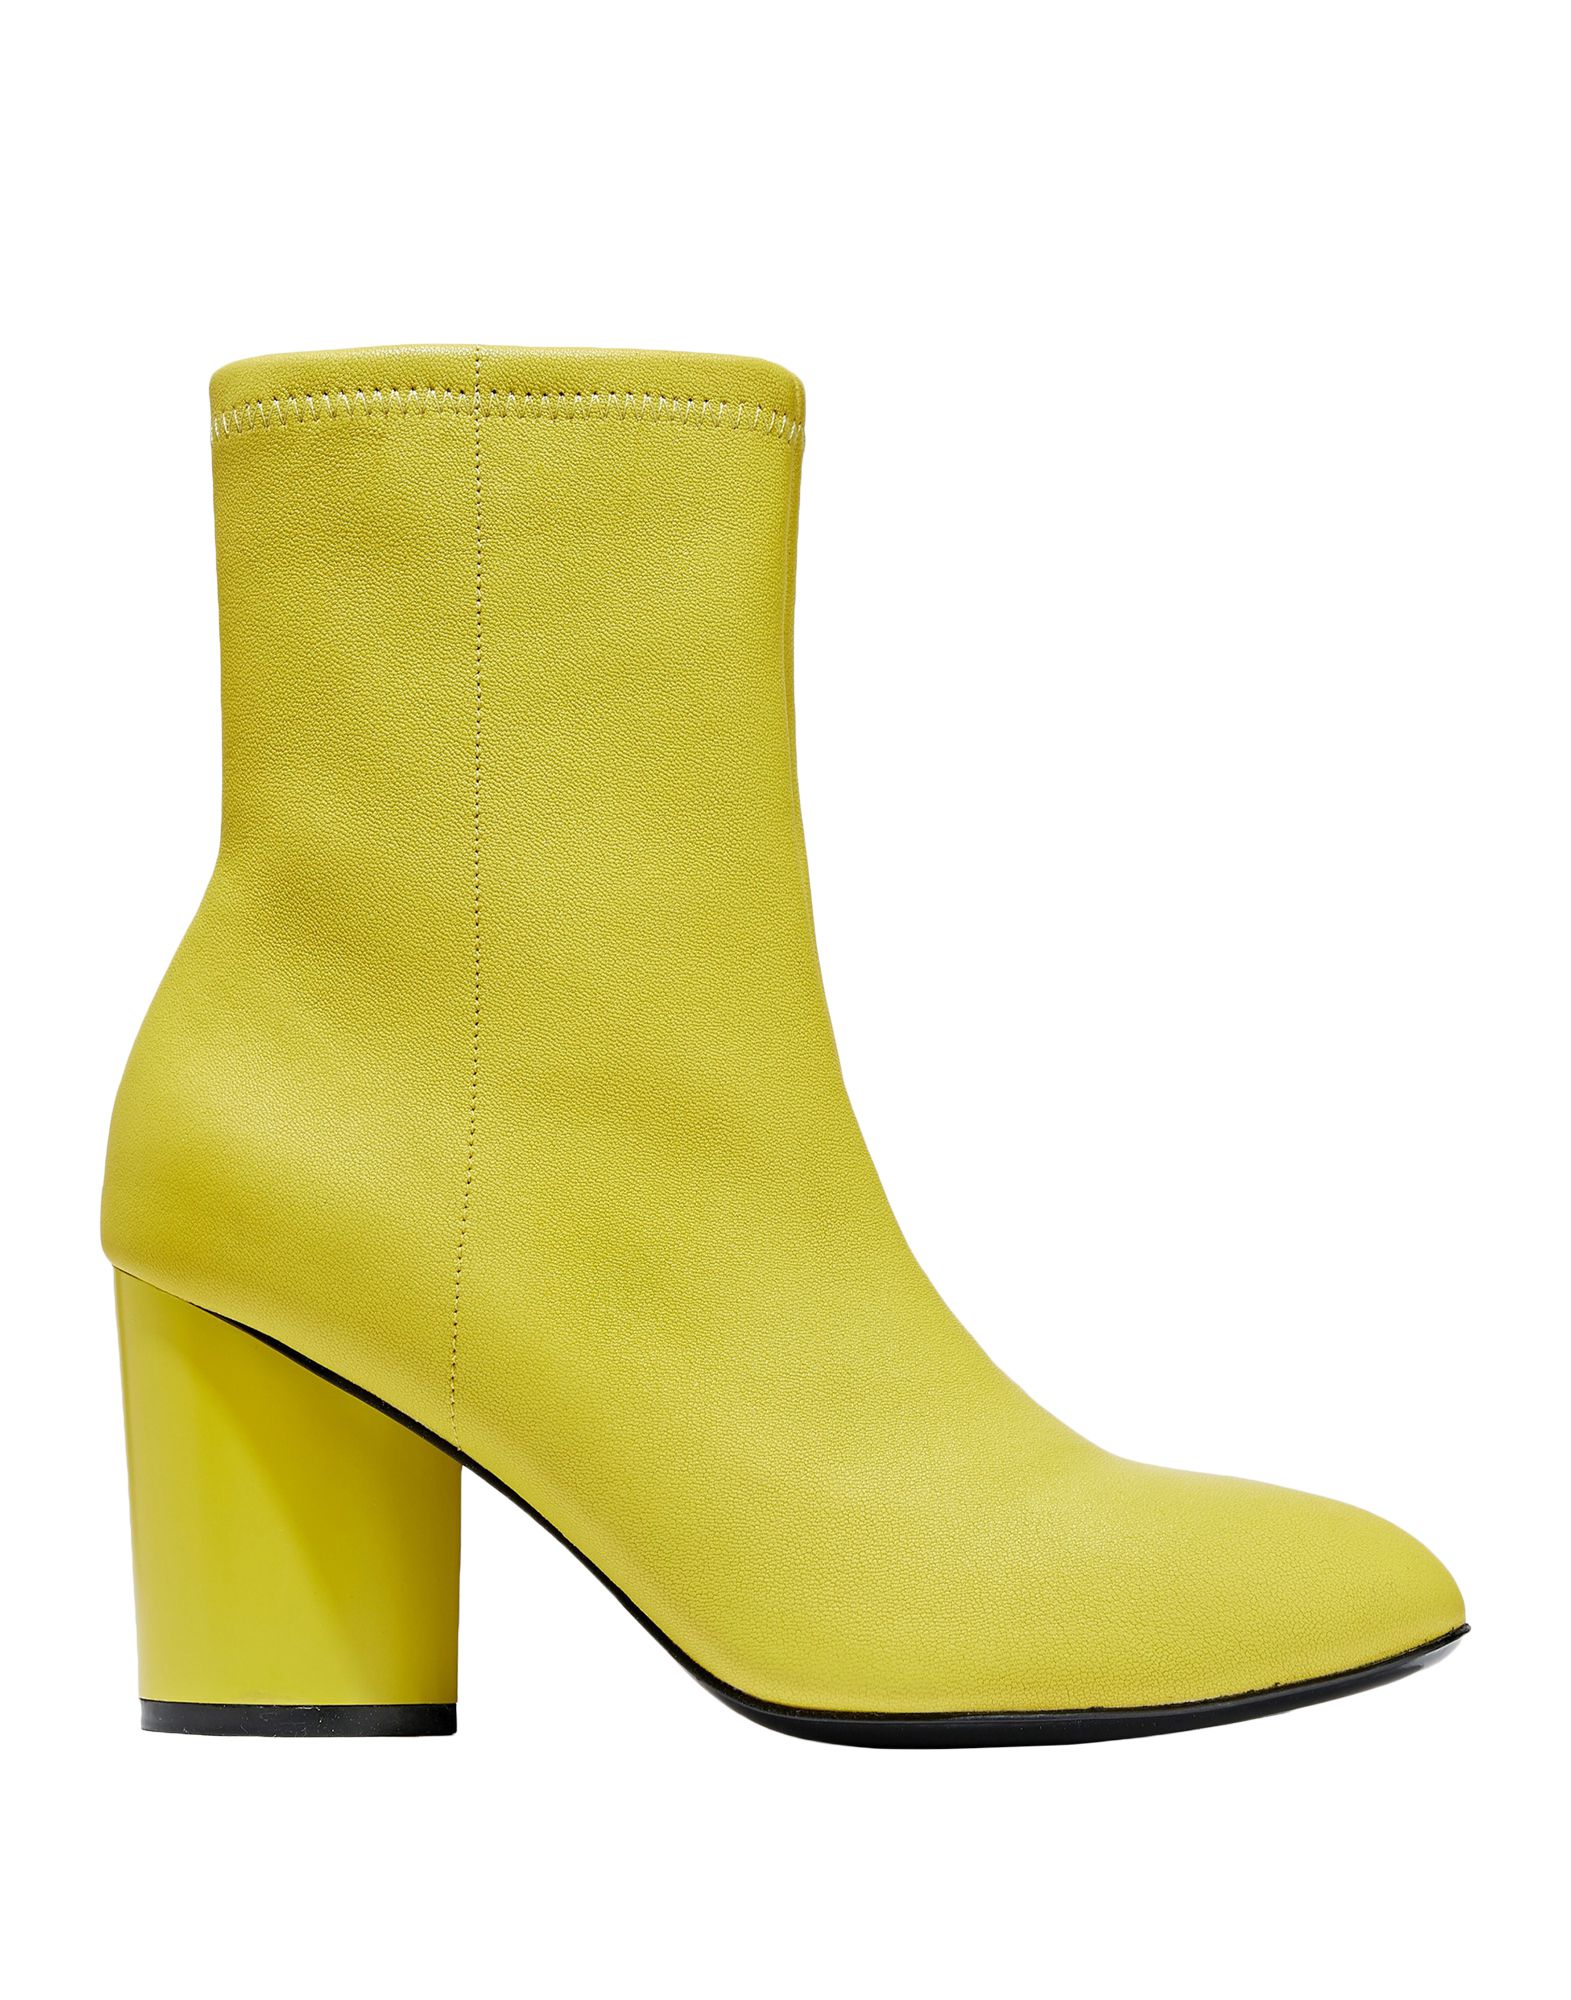 OPENING CEREMONY Ankle boot,11688851HO 5